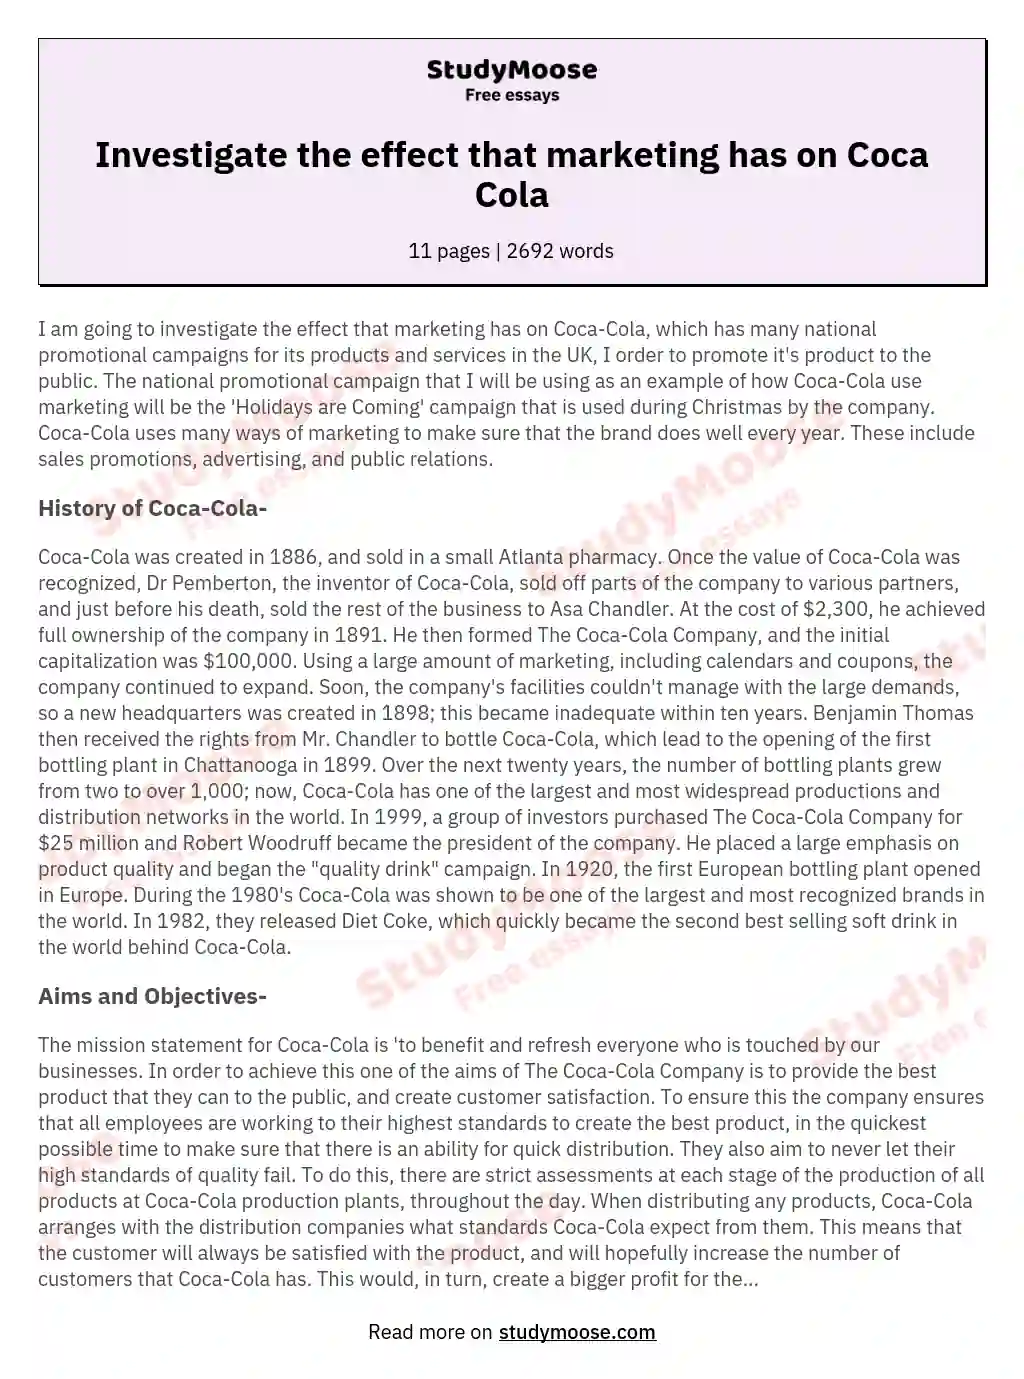 Investigate the effect that marketing has on Coca Cola essay